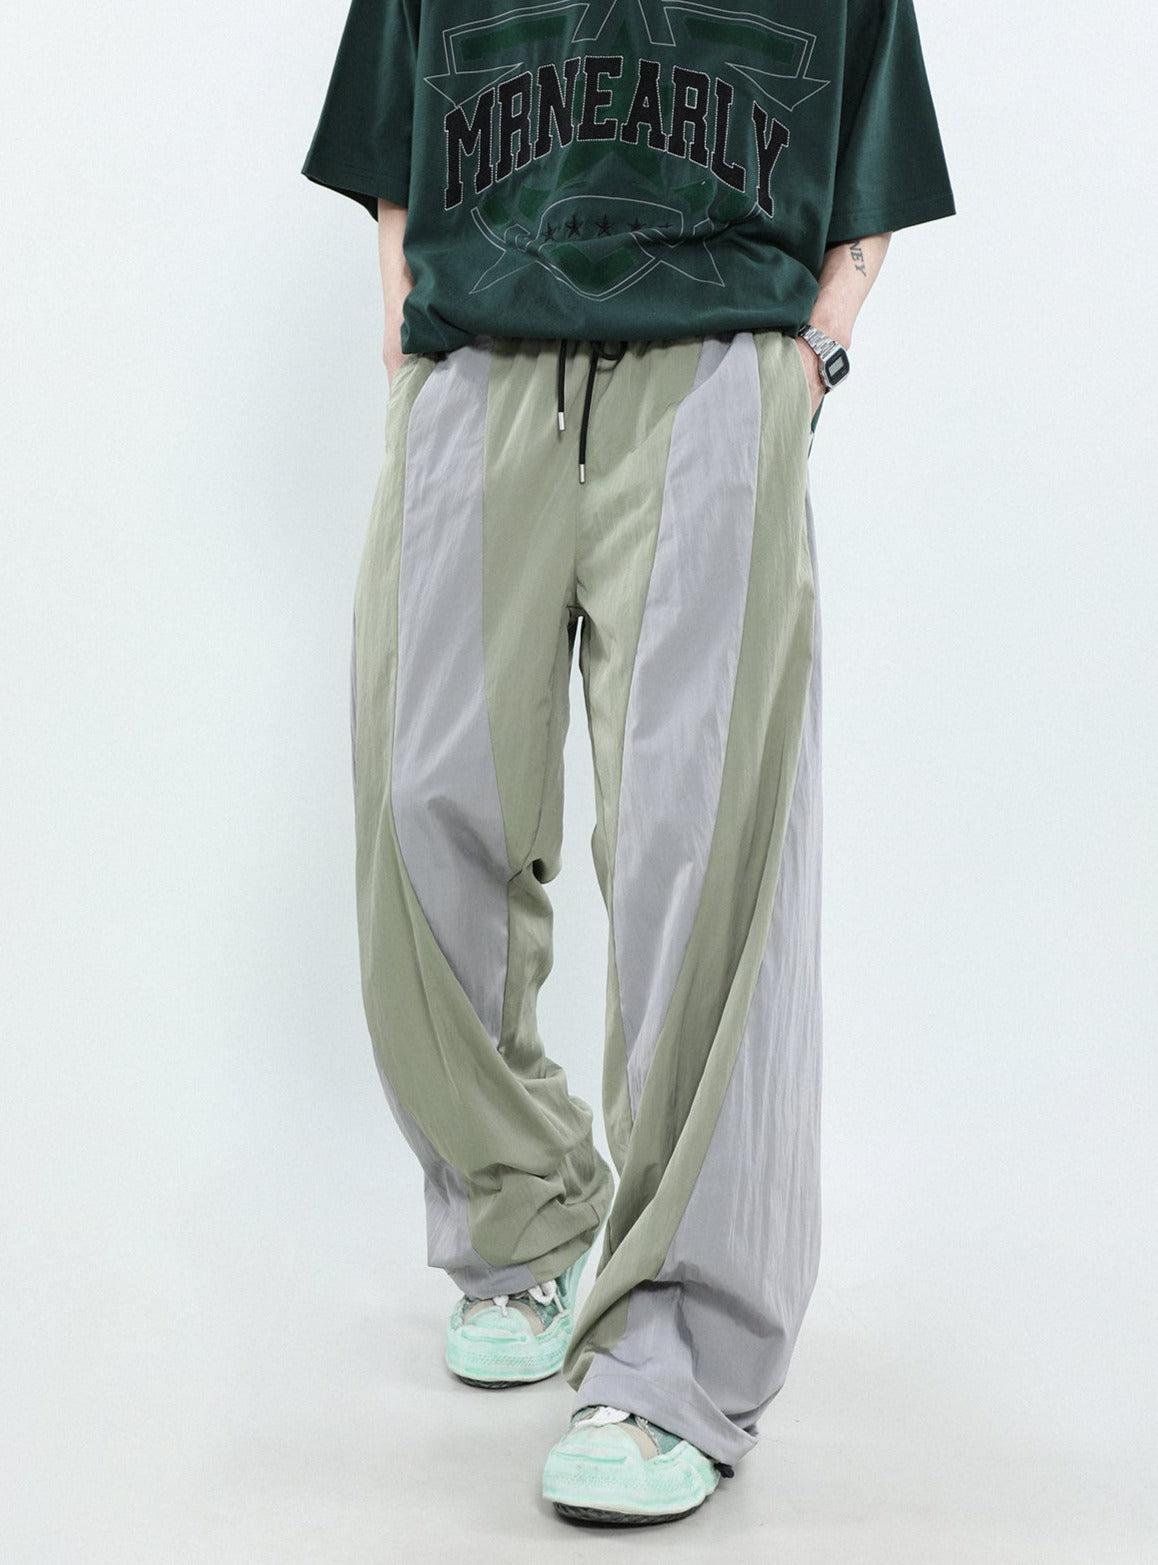 Mr Nearly Drawstring Symmetric Contrast Sports Pants Korean Street Fashion Pants By Mr Nearly Shop Online at OH Vault